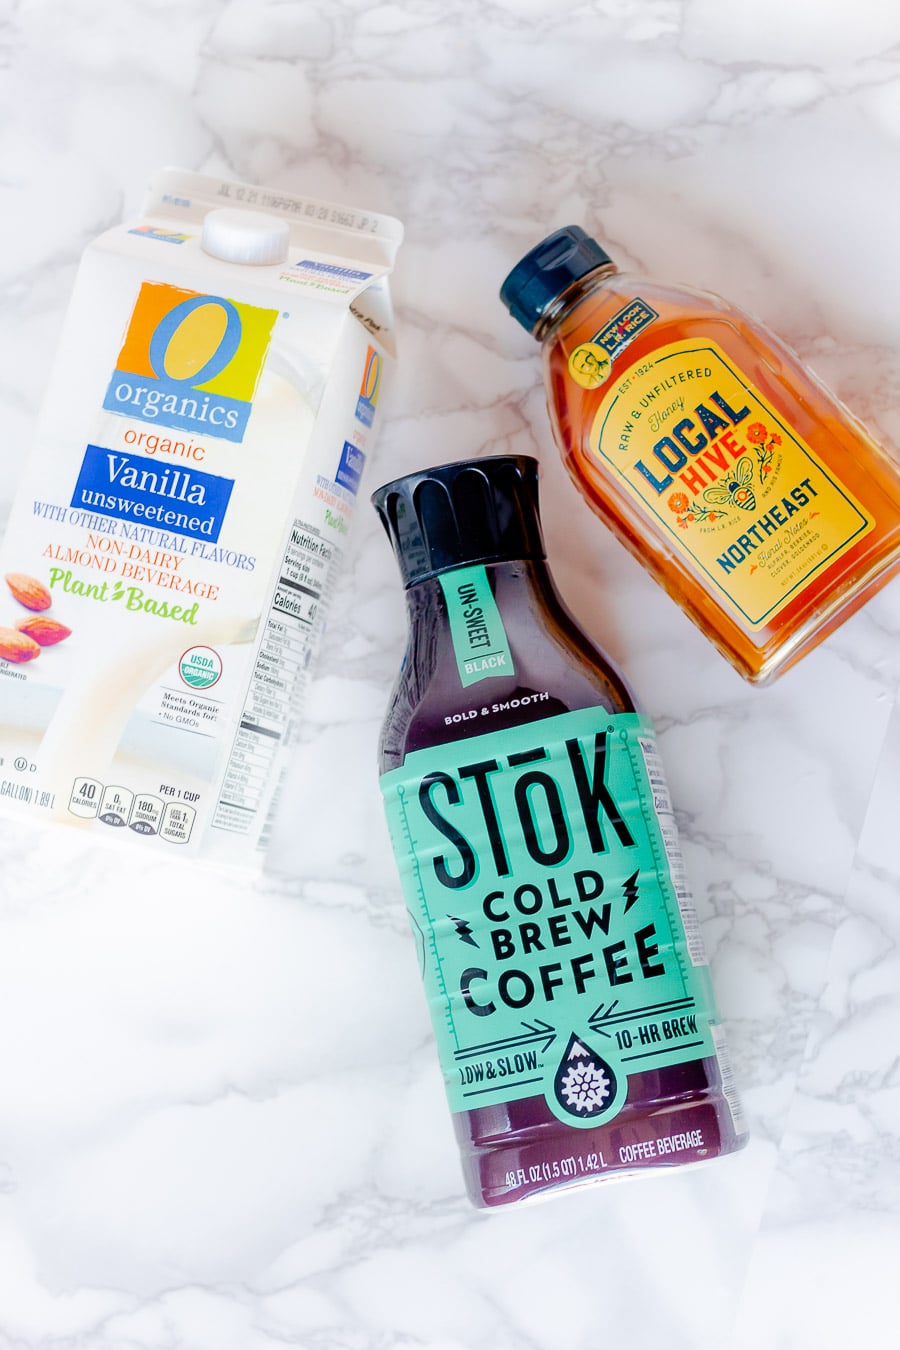 I like a good imitation Starbucks recipe. When I tried the Starbucks honey almond milkshake for the first time, I knew I needed to make it at home. This imitation Starbucks honey almond cold milkshake recipe will absolutely be my summer cold brew.